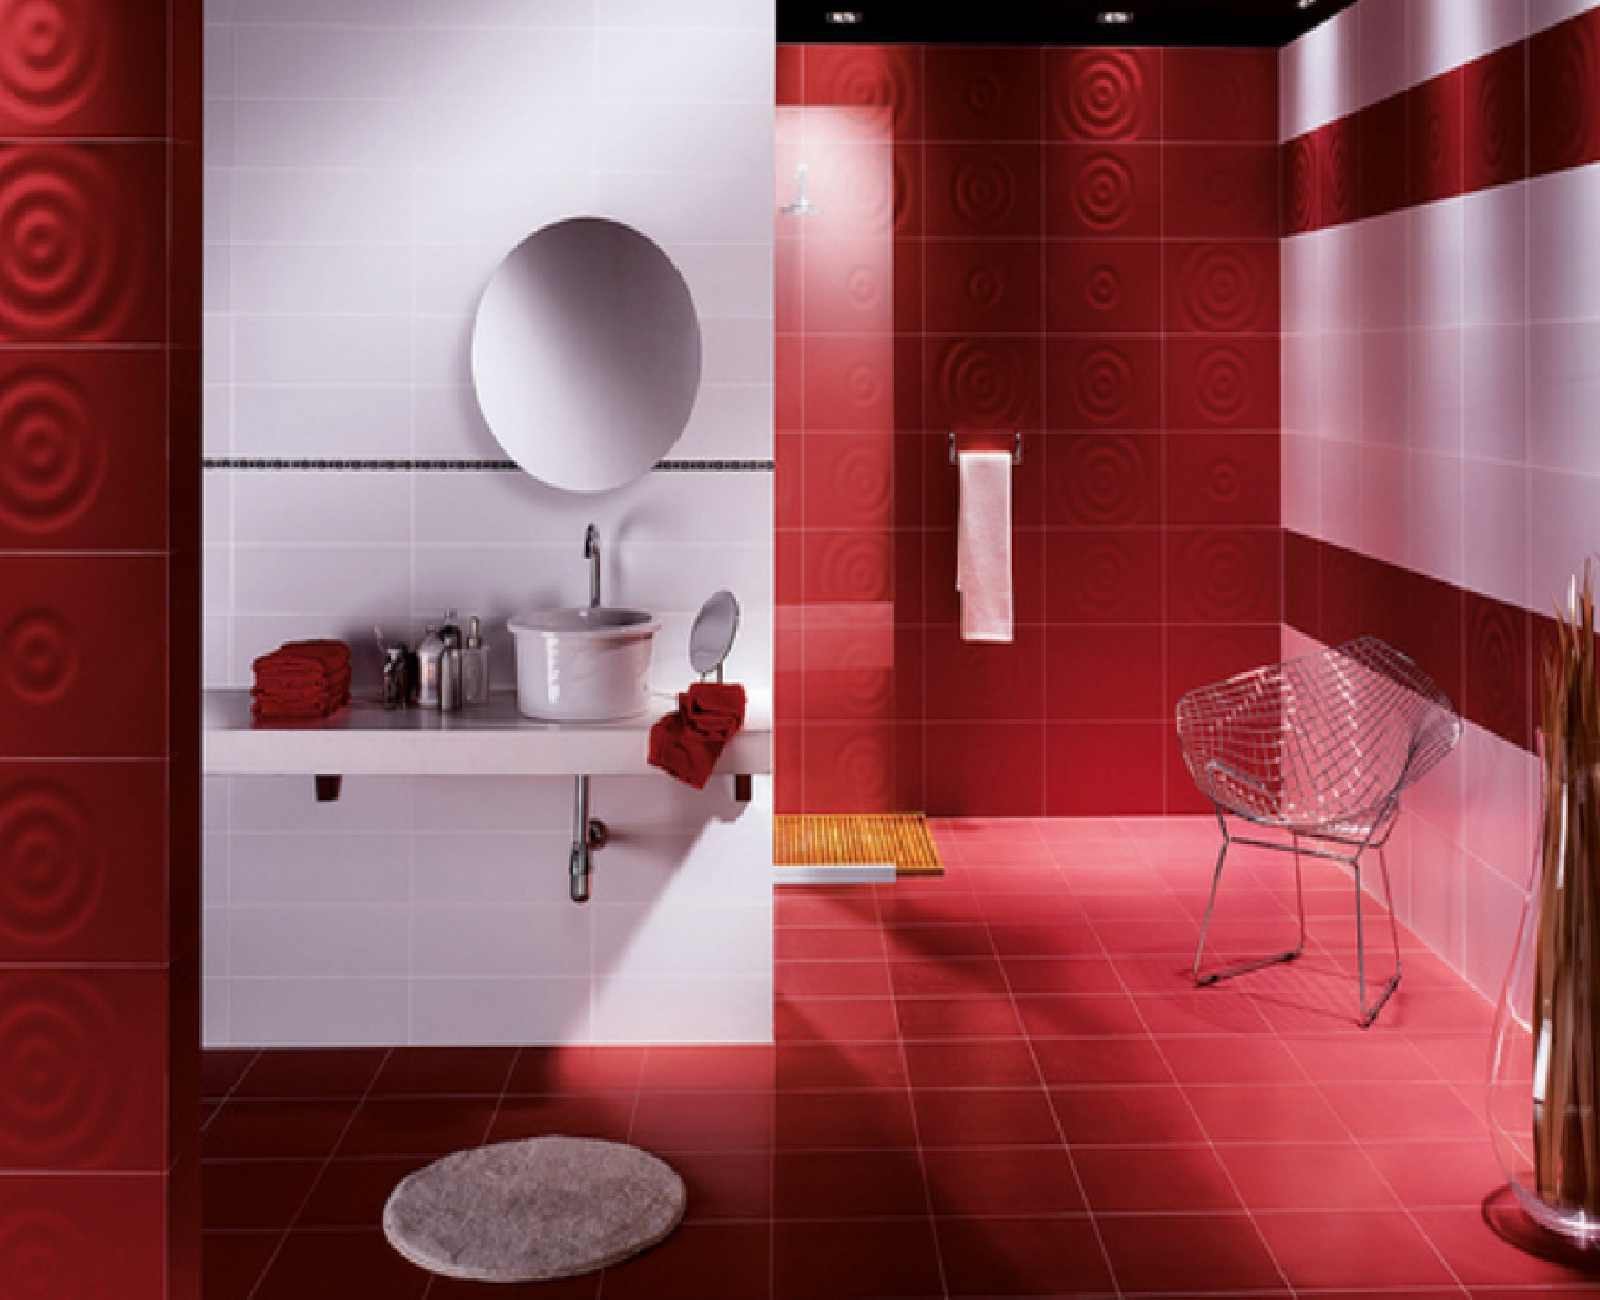 Red and Brown Bathroom Decor Inspirational 99 Excelent Red and Brown Bathroom Accessories Image Ideas